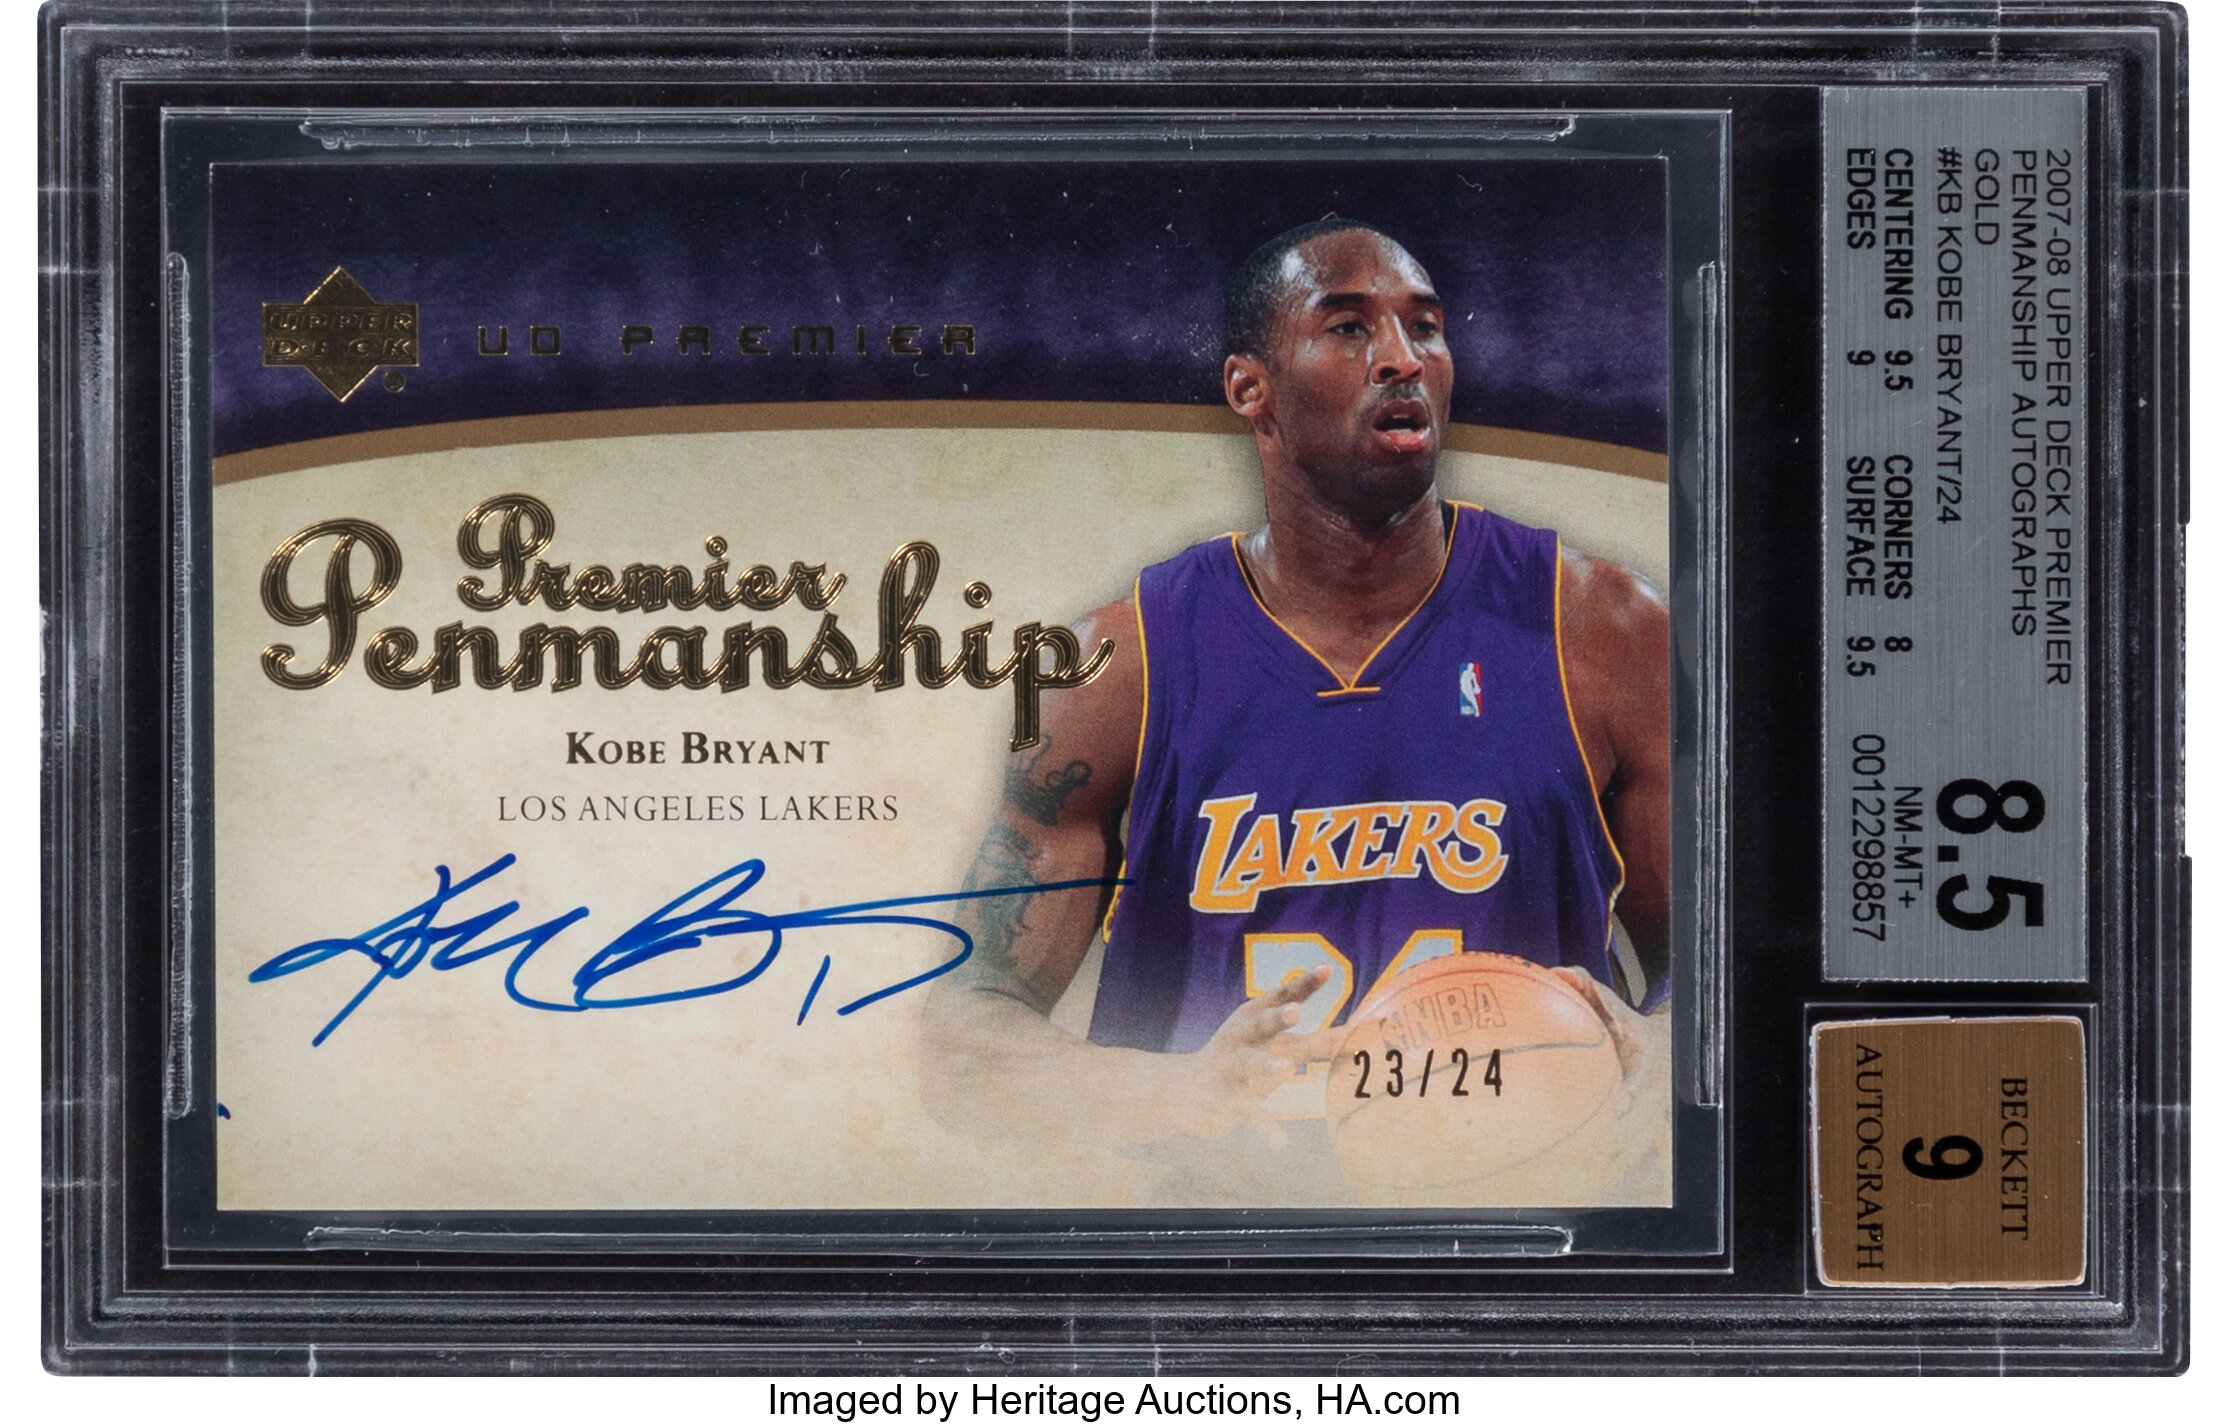 Rare, Signed Michael Jordan, Kobe Bryant Jersey Card Up For Auction